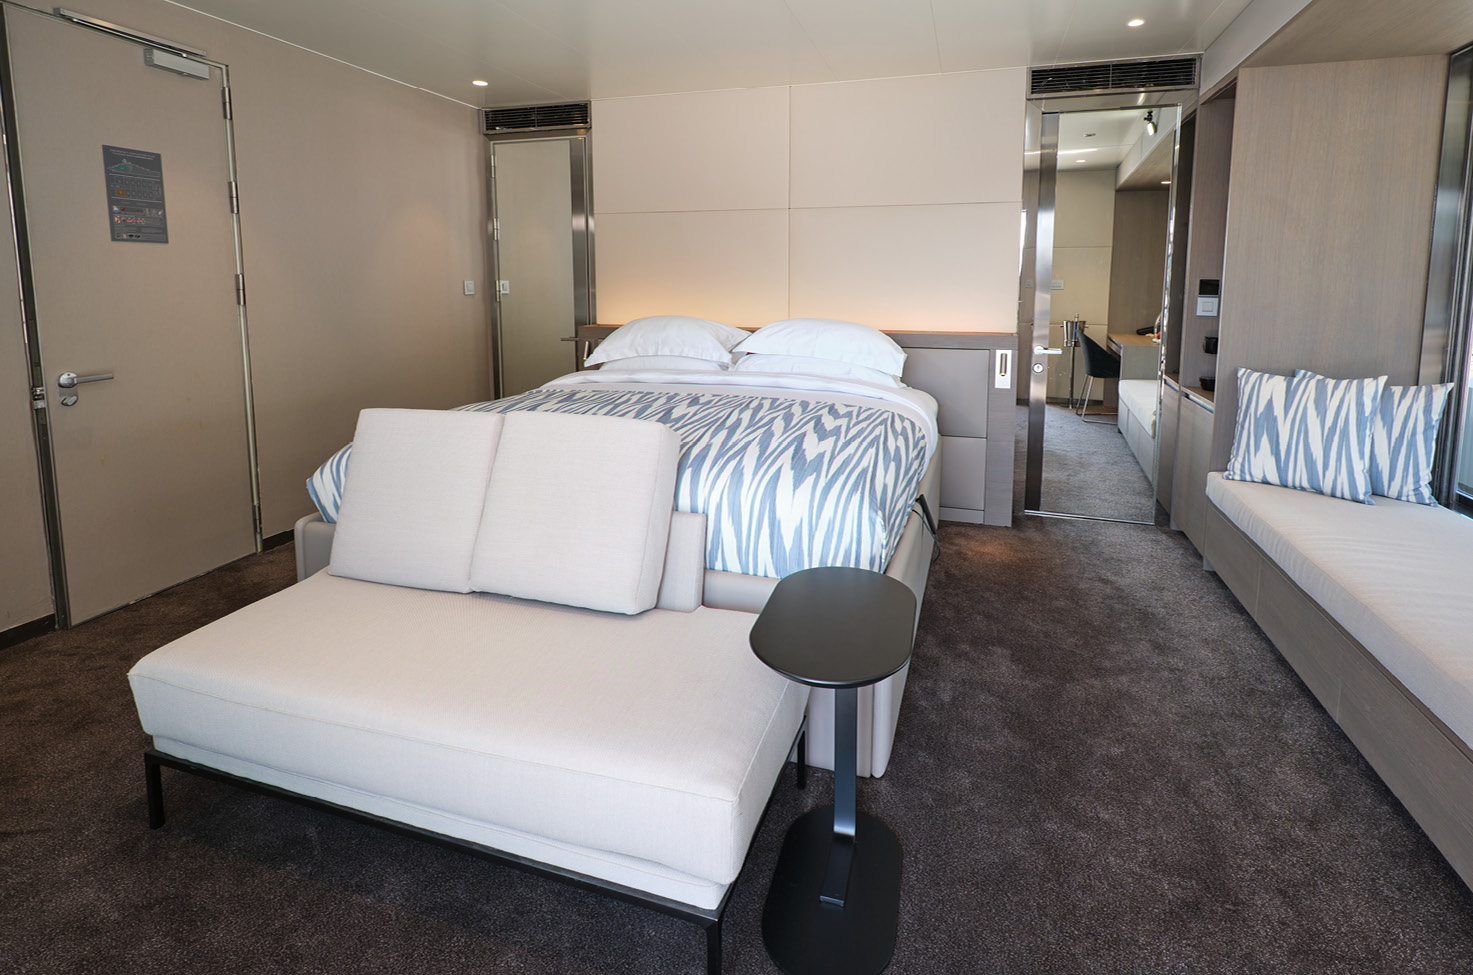 Suite on board a luxury yacht with double bed and balcony doors shown